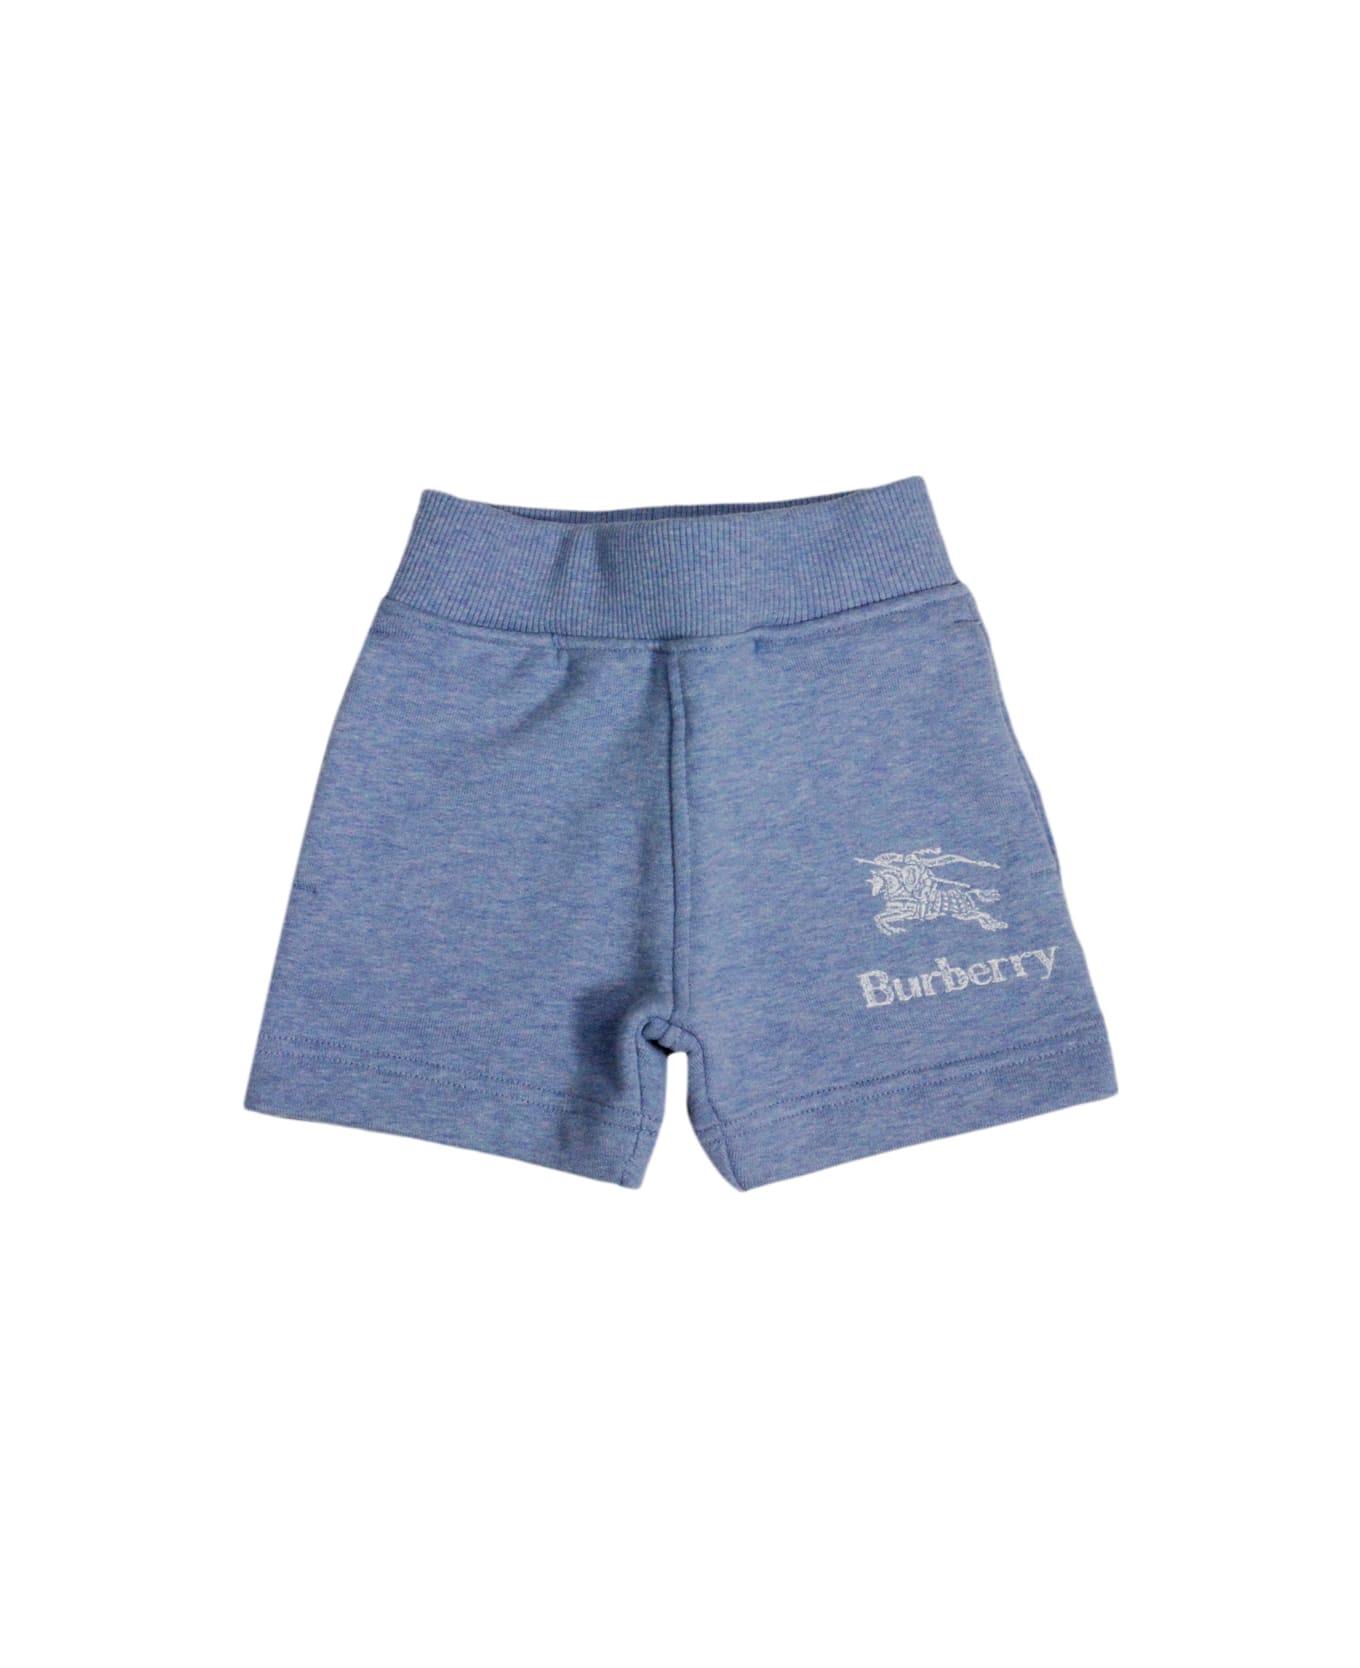 Burberry Cotton Fleece Bermuda Shorts With Elasticated Waist And Welt Pockets With Logo On The Front - Light Blu ボトムス